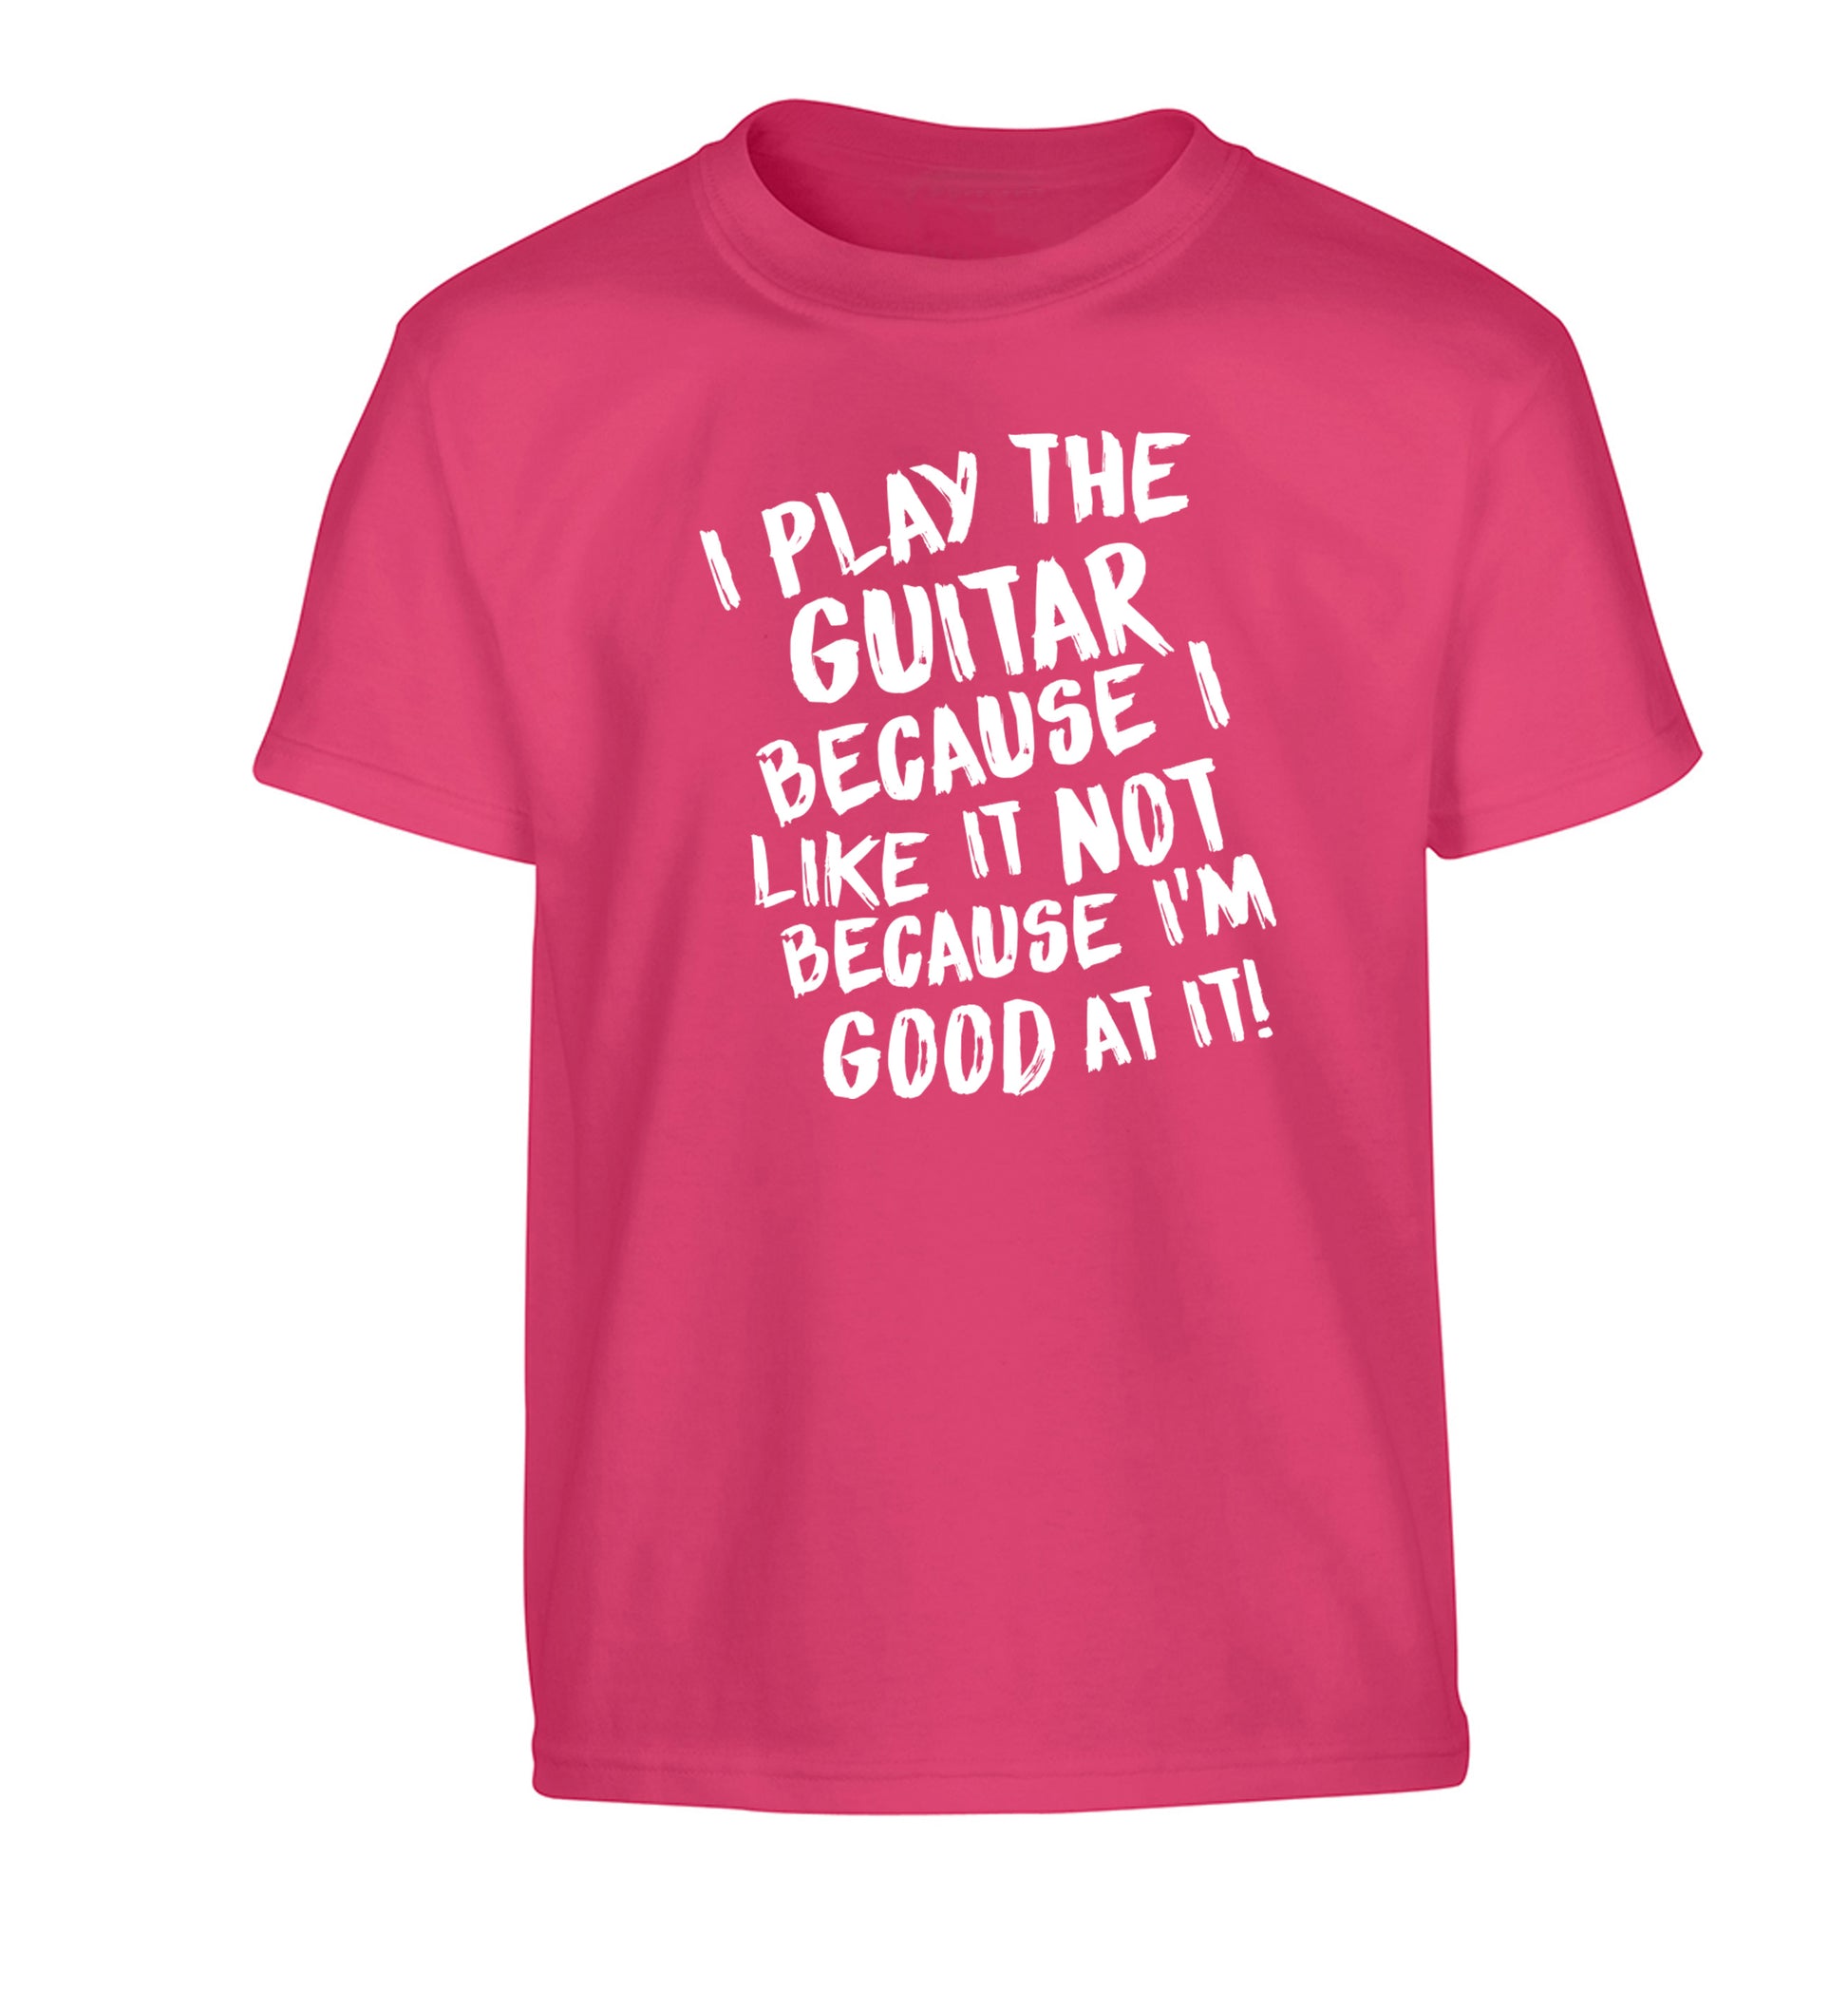 I play the guitar because I like it not because I'm good at it Children's pink Tshirt 12-14 Years